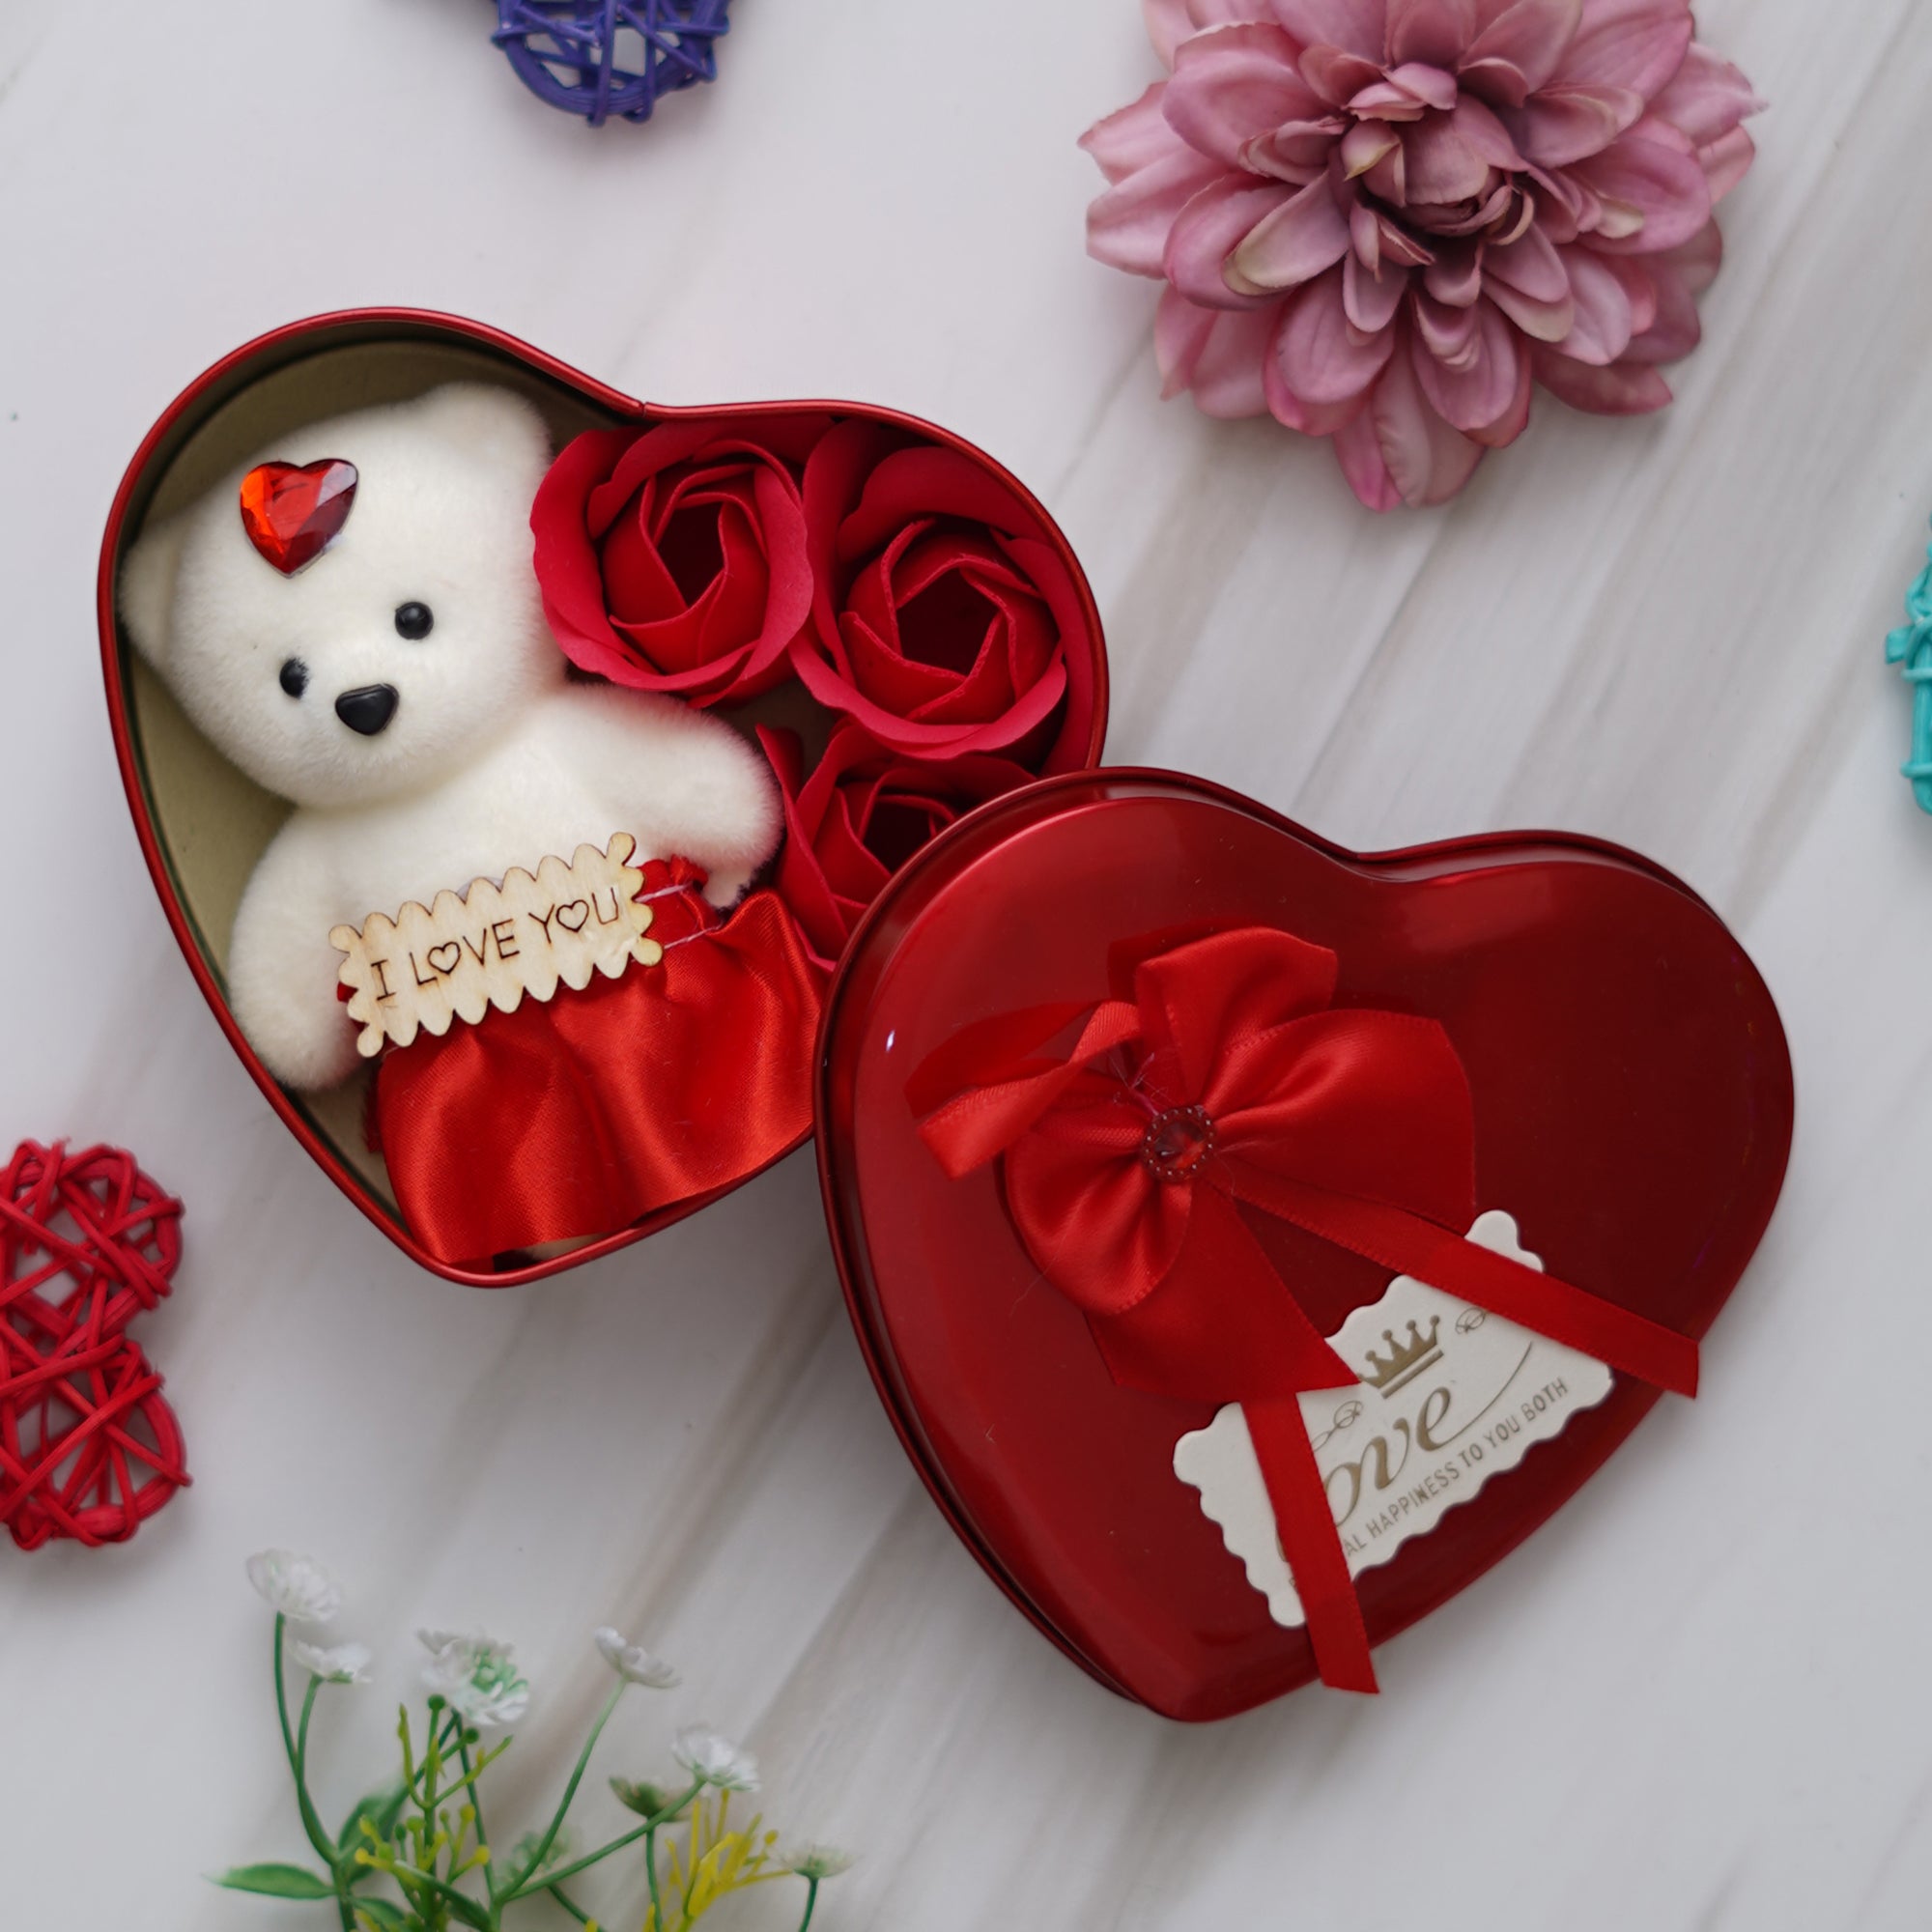 Valentine Combo of Pack of 12 Love Coupons Gift Cards Set, "Love You" Wooden Showpiece With Stand, Heart Shaped Gift Box Set with White Teddy and Red Roses 5